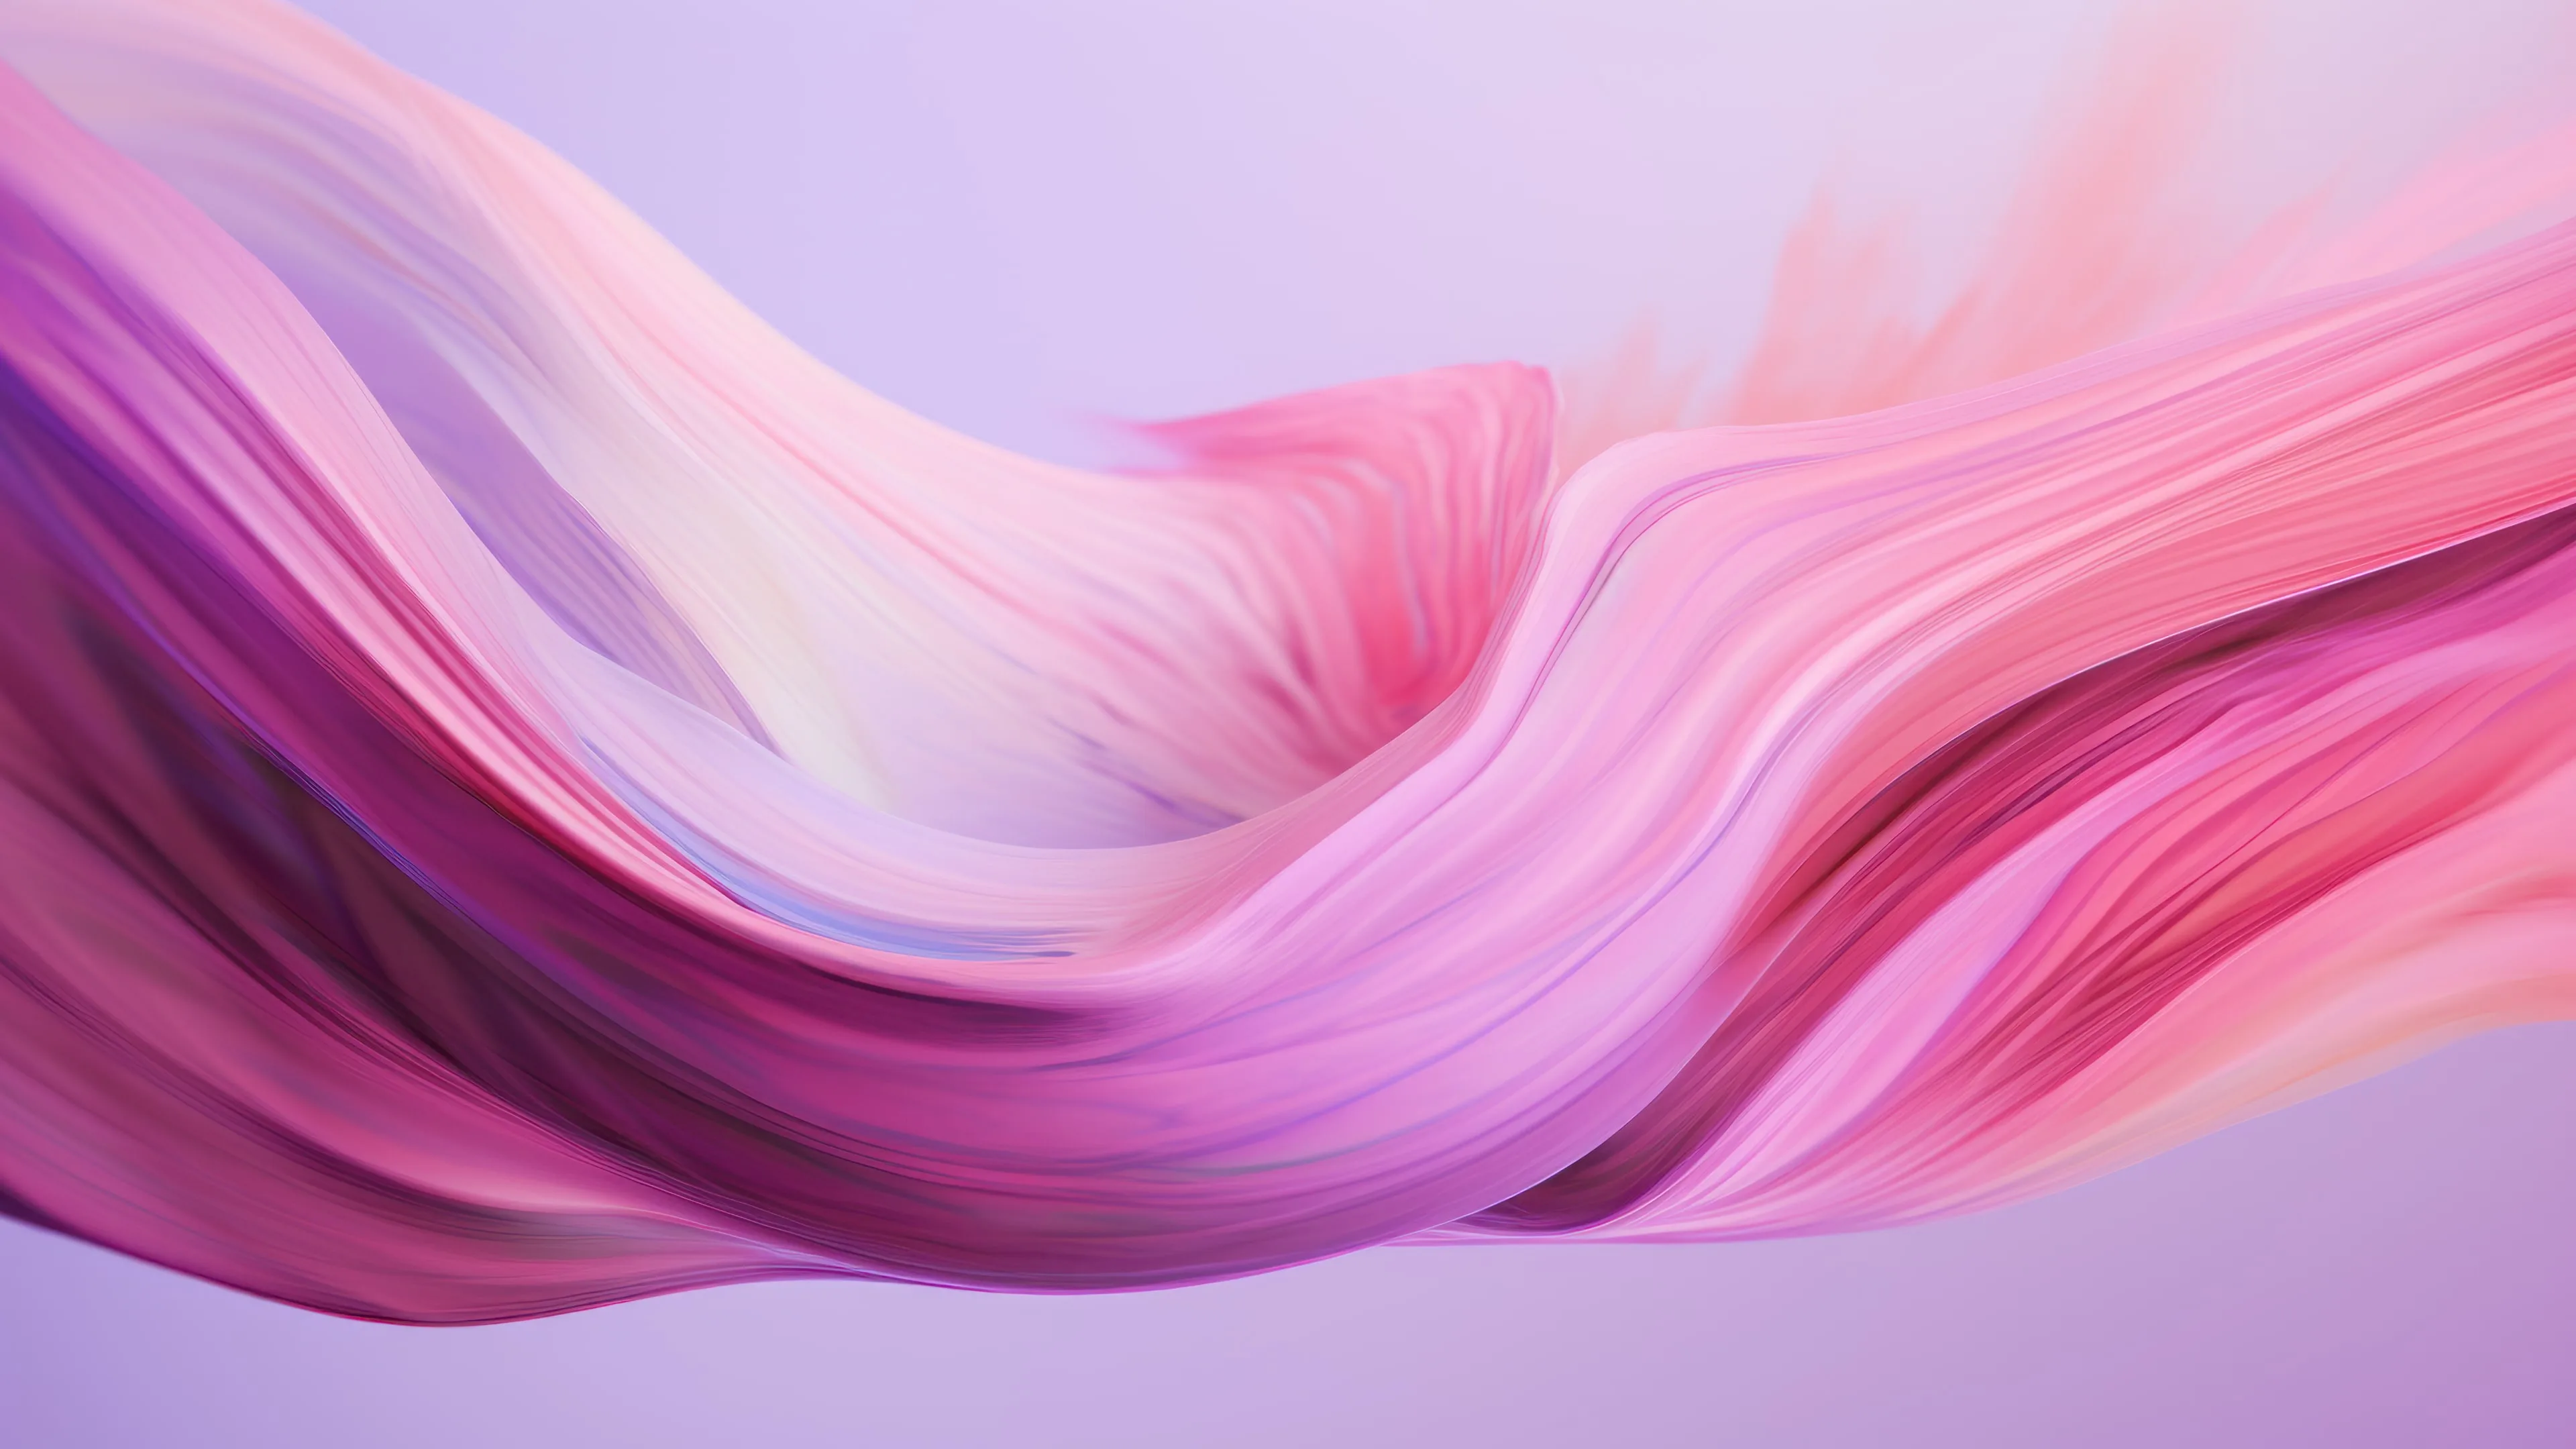 A pink and purple abstract painting on a light purple background - Windows 10